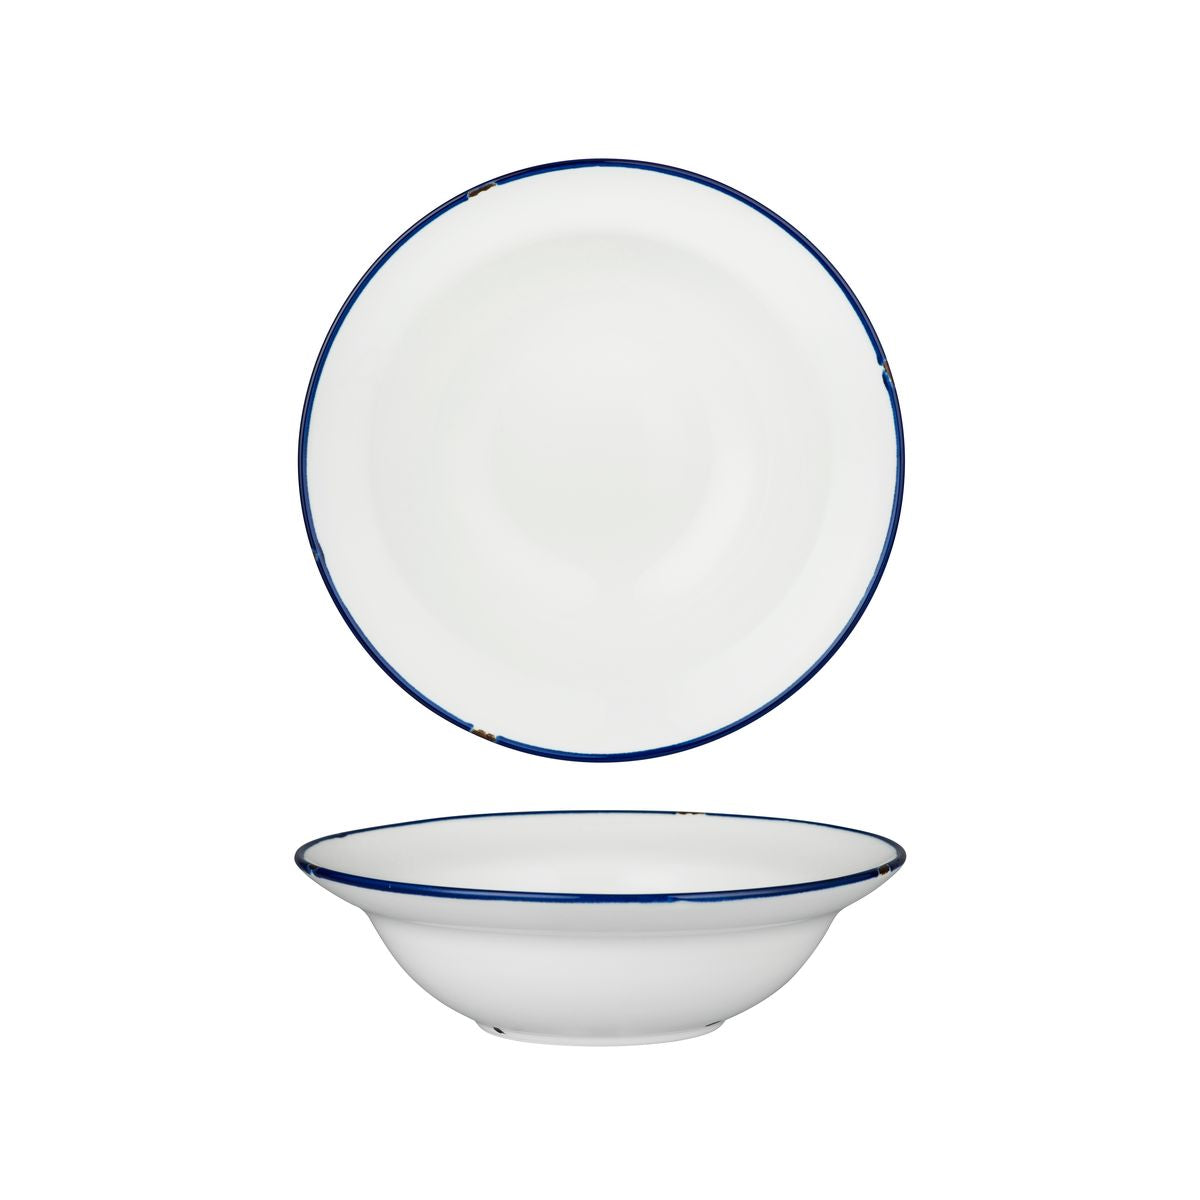 Deep Bowl Plate - 220mm, Tintin White & Navy from Luzerne. made out of Ceramic and sold in boxes of 12. Hospitality quality at wholesale price with The Flying Fork! 